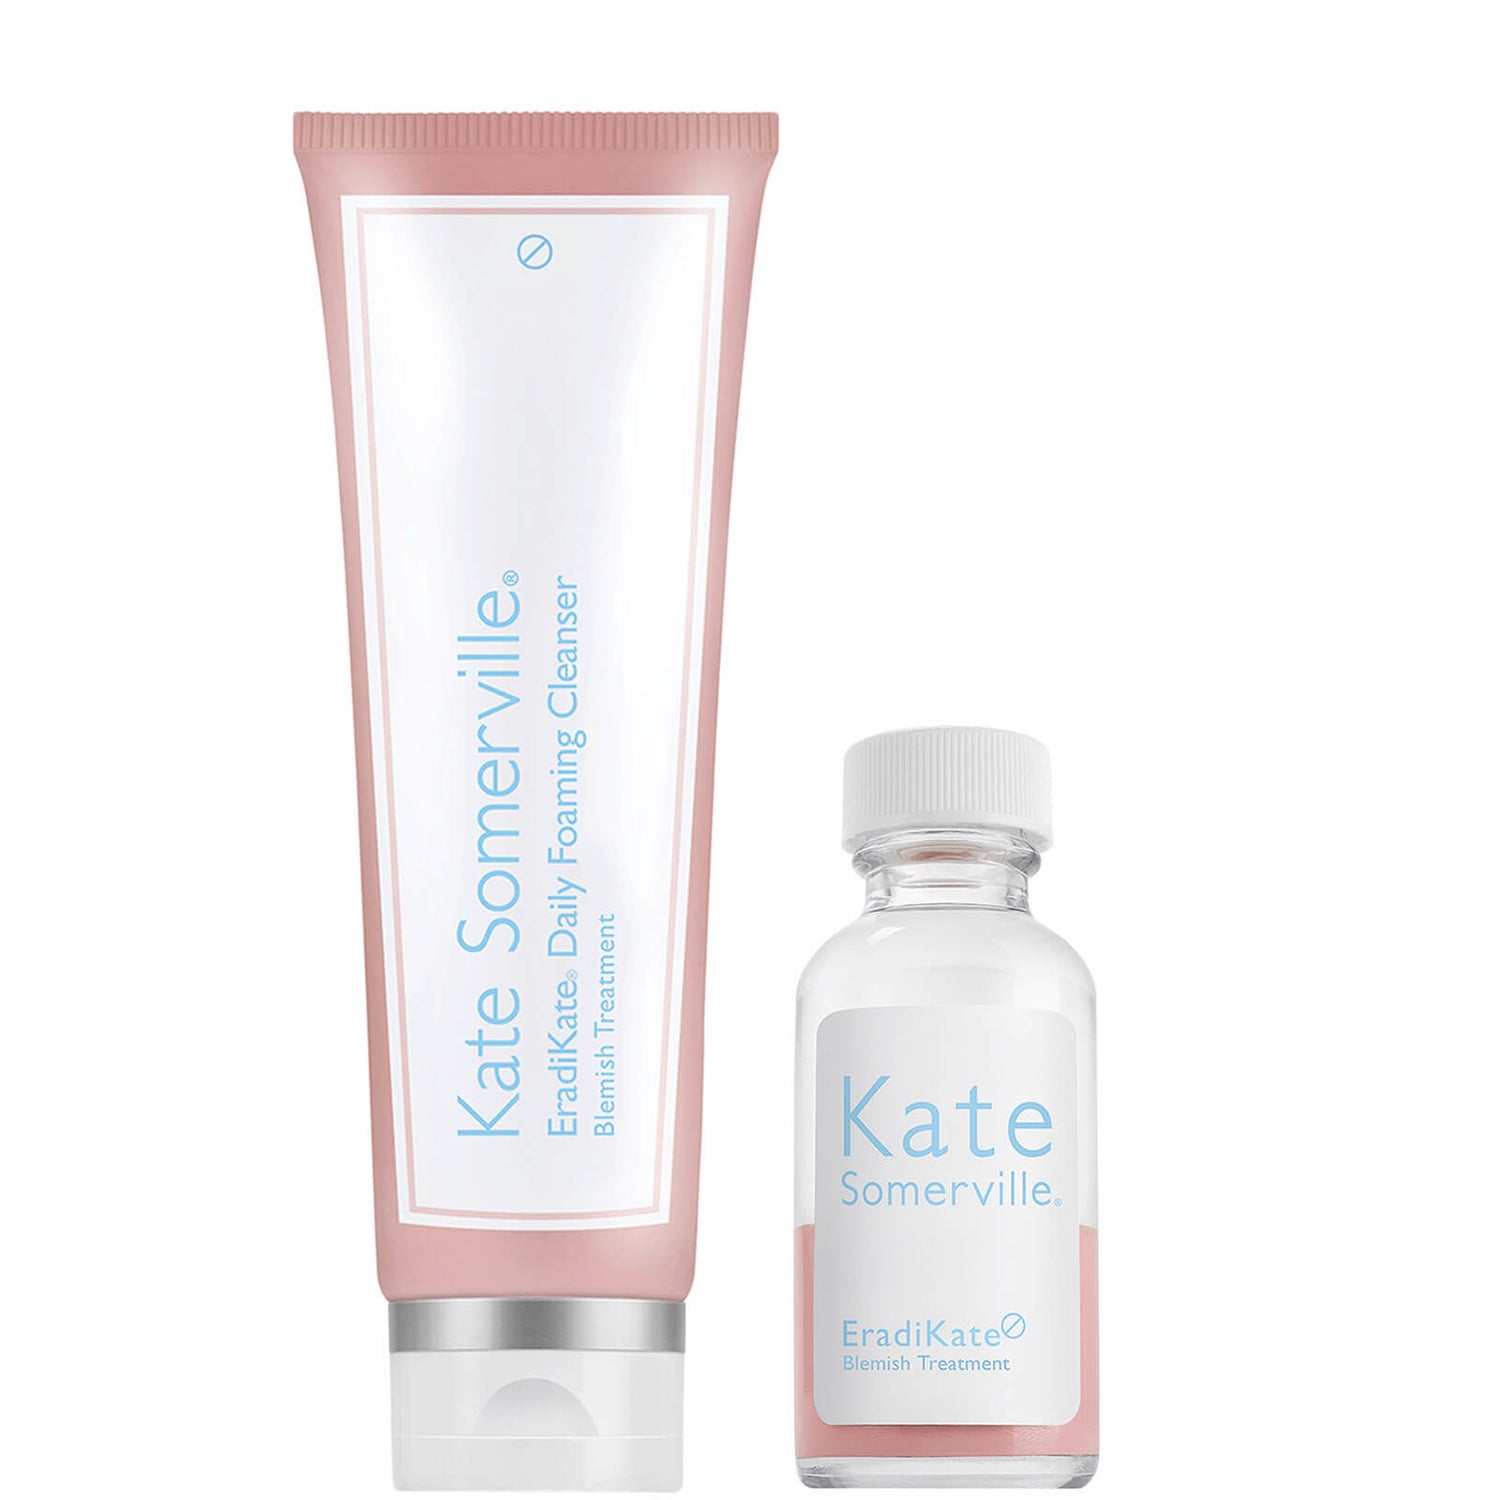 Kate Somerville Eradikate Cleanse and Treat Duo (Worth £56.00)